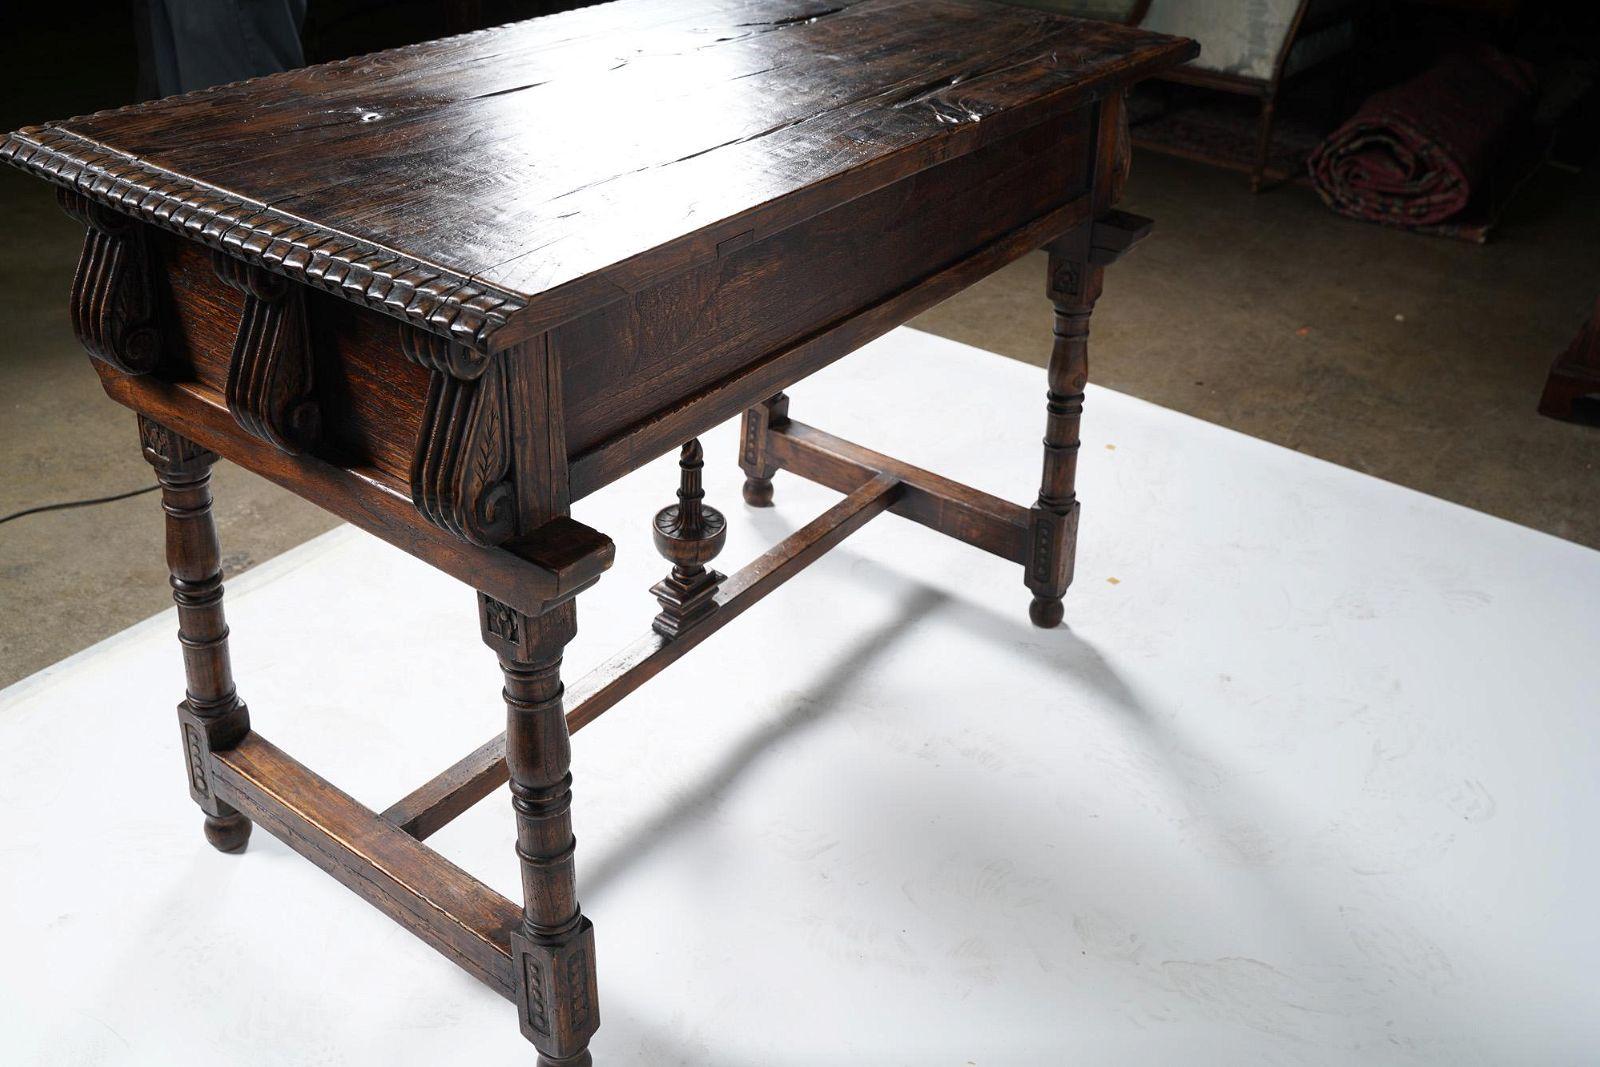 Hand-Carved Antique Spanish Baroque Colonial Revival Carved Oak Console Table Circa 1890 For Sale